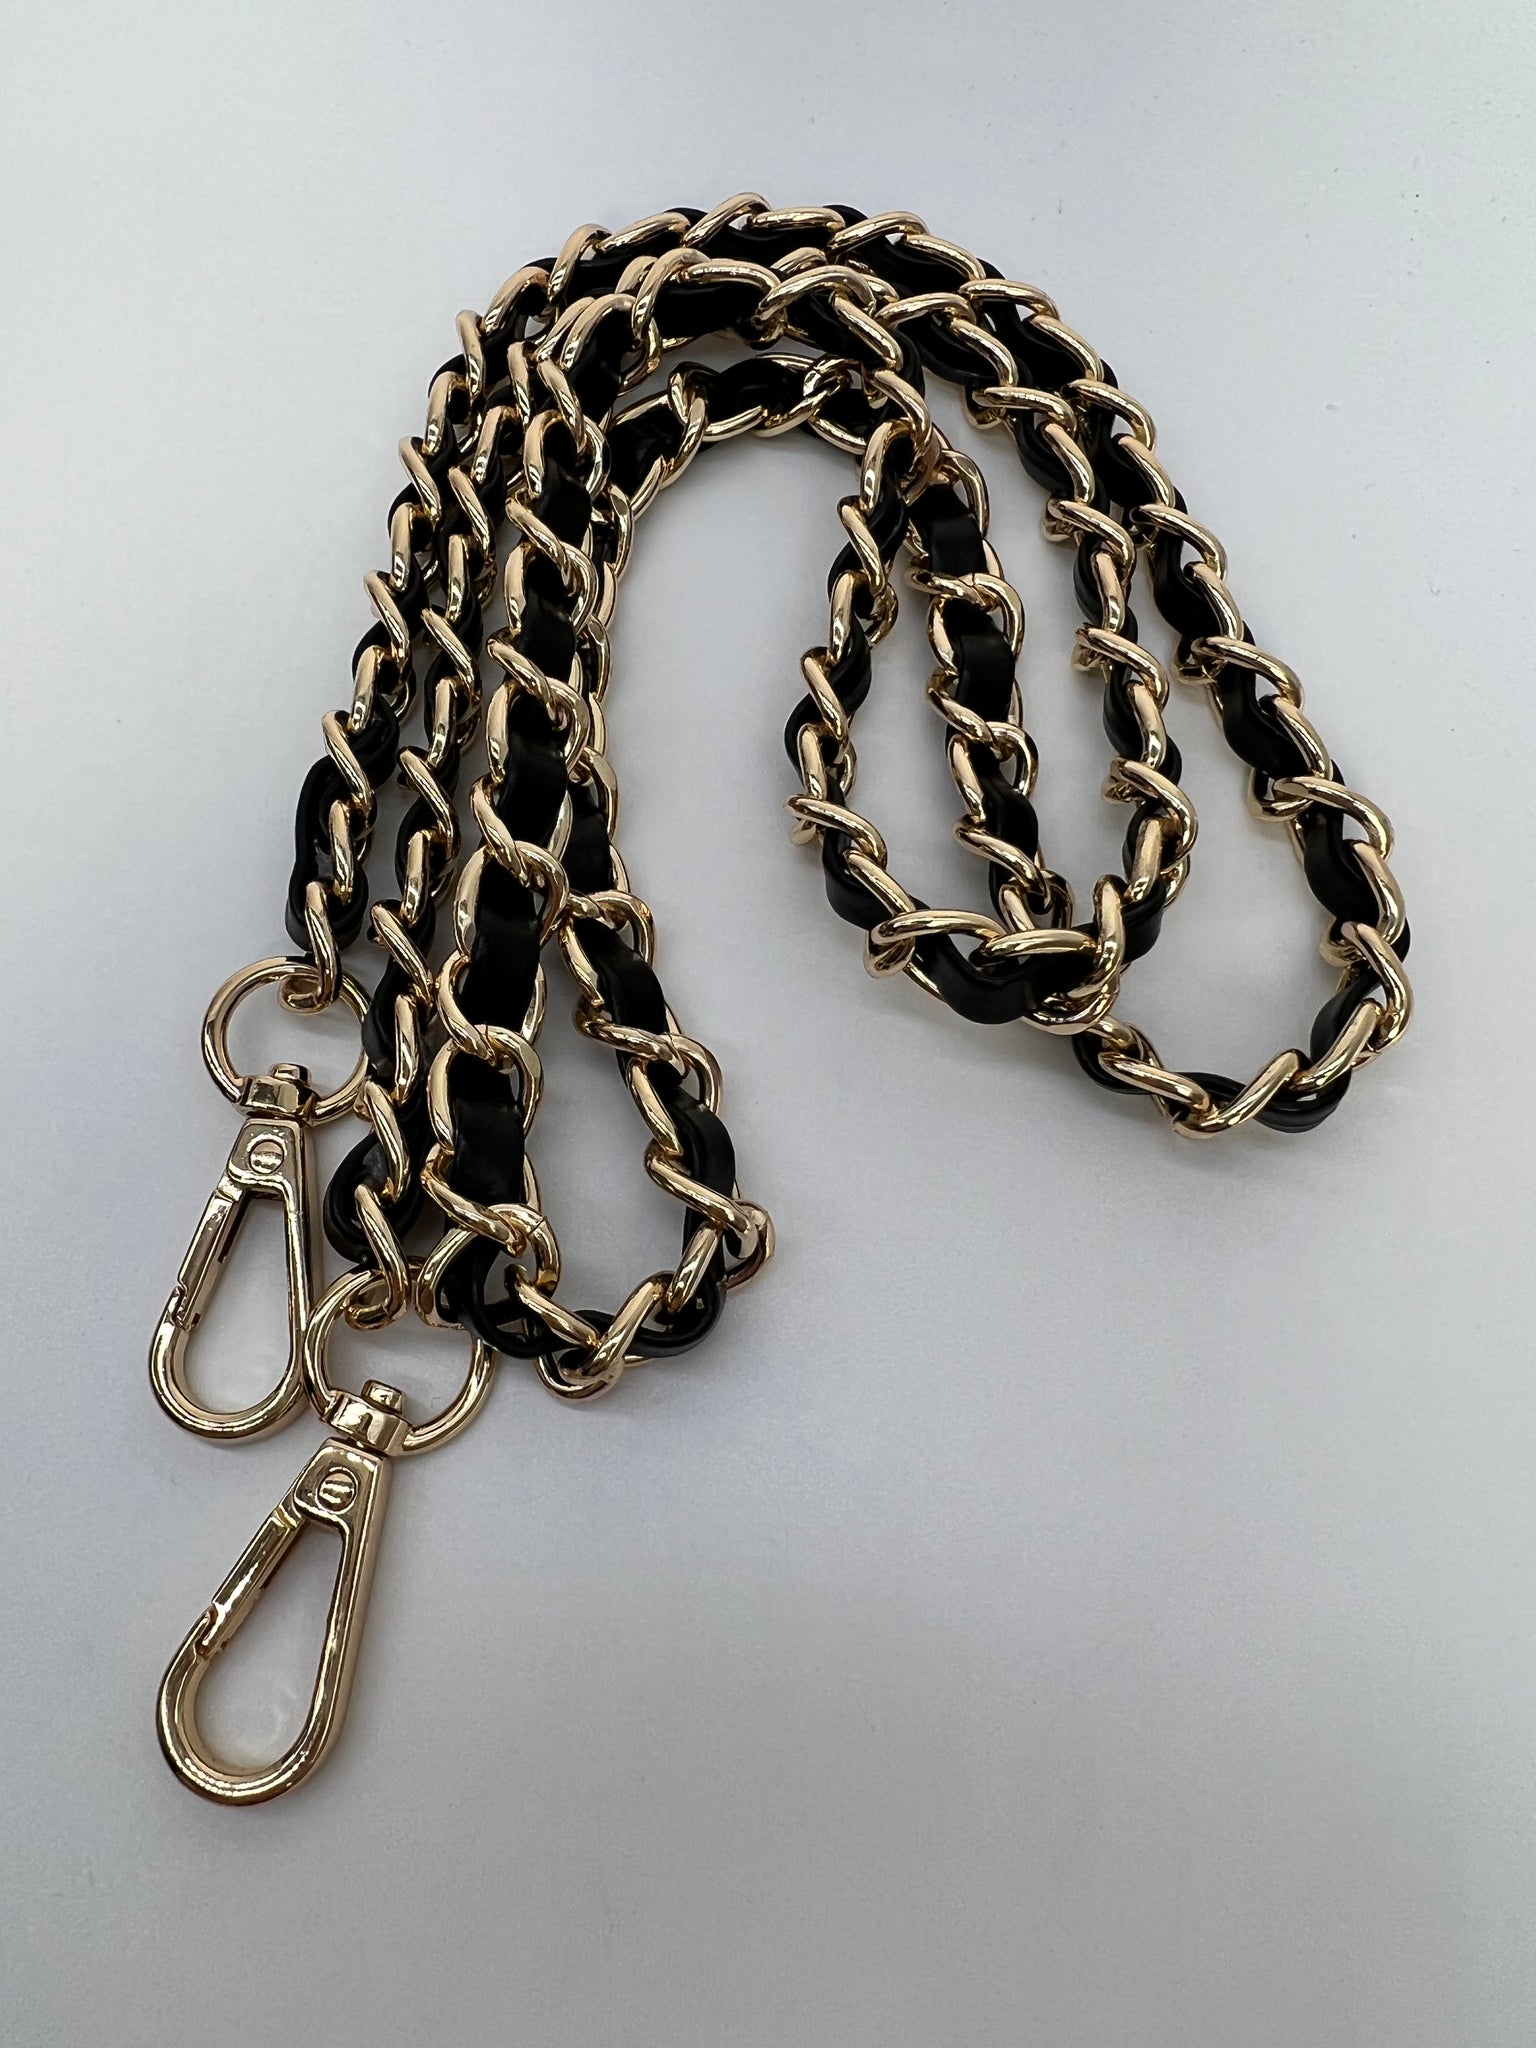 NEW Metal and Leather Purse Chain Straps - 5 colors